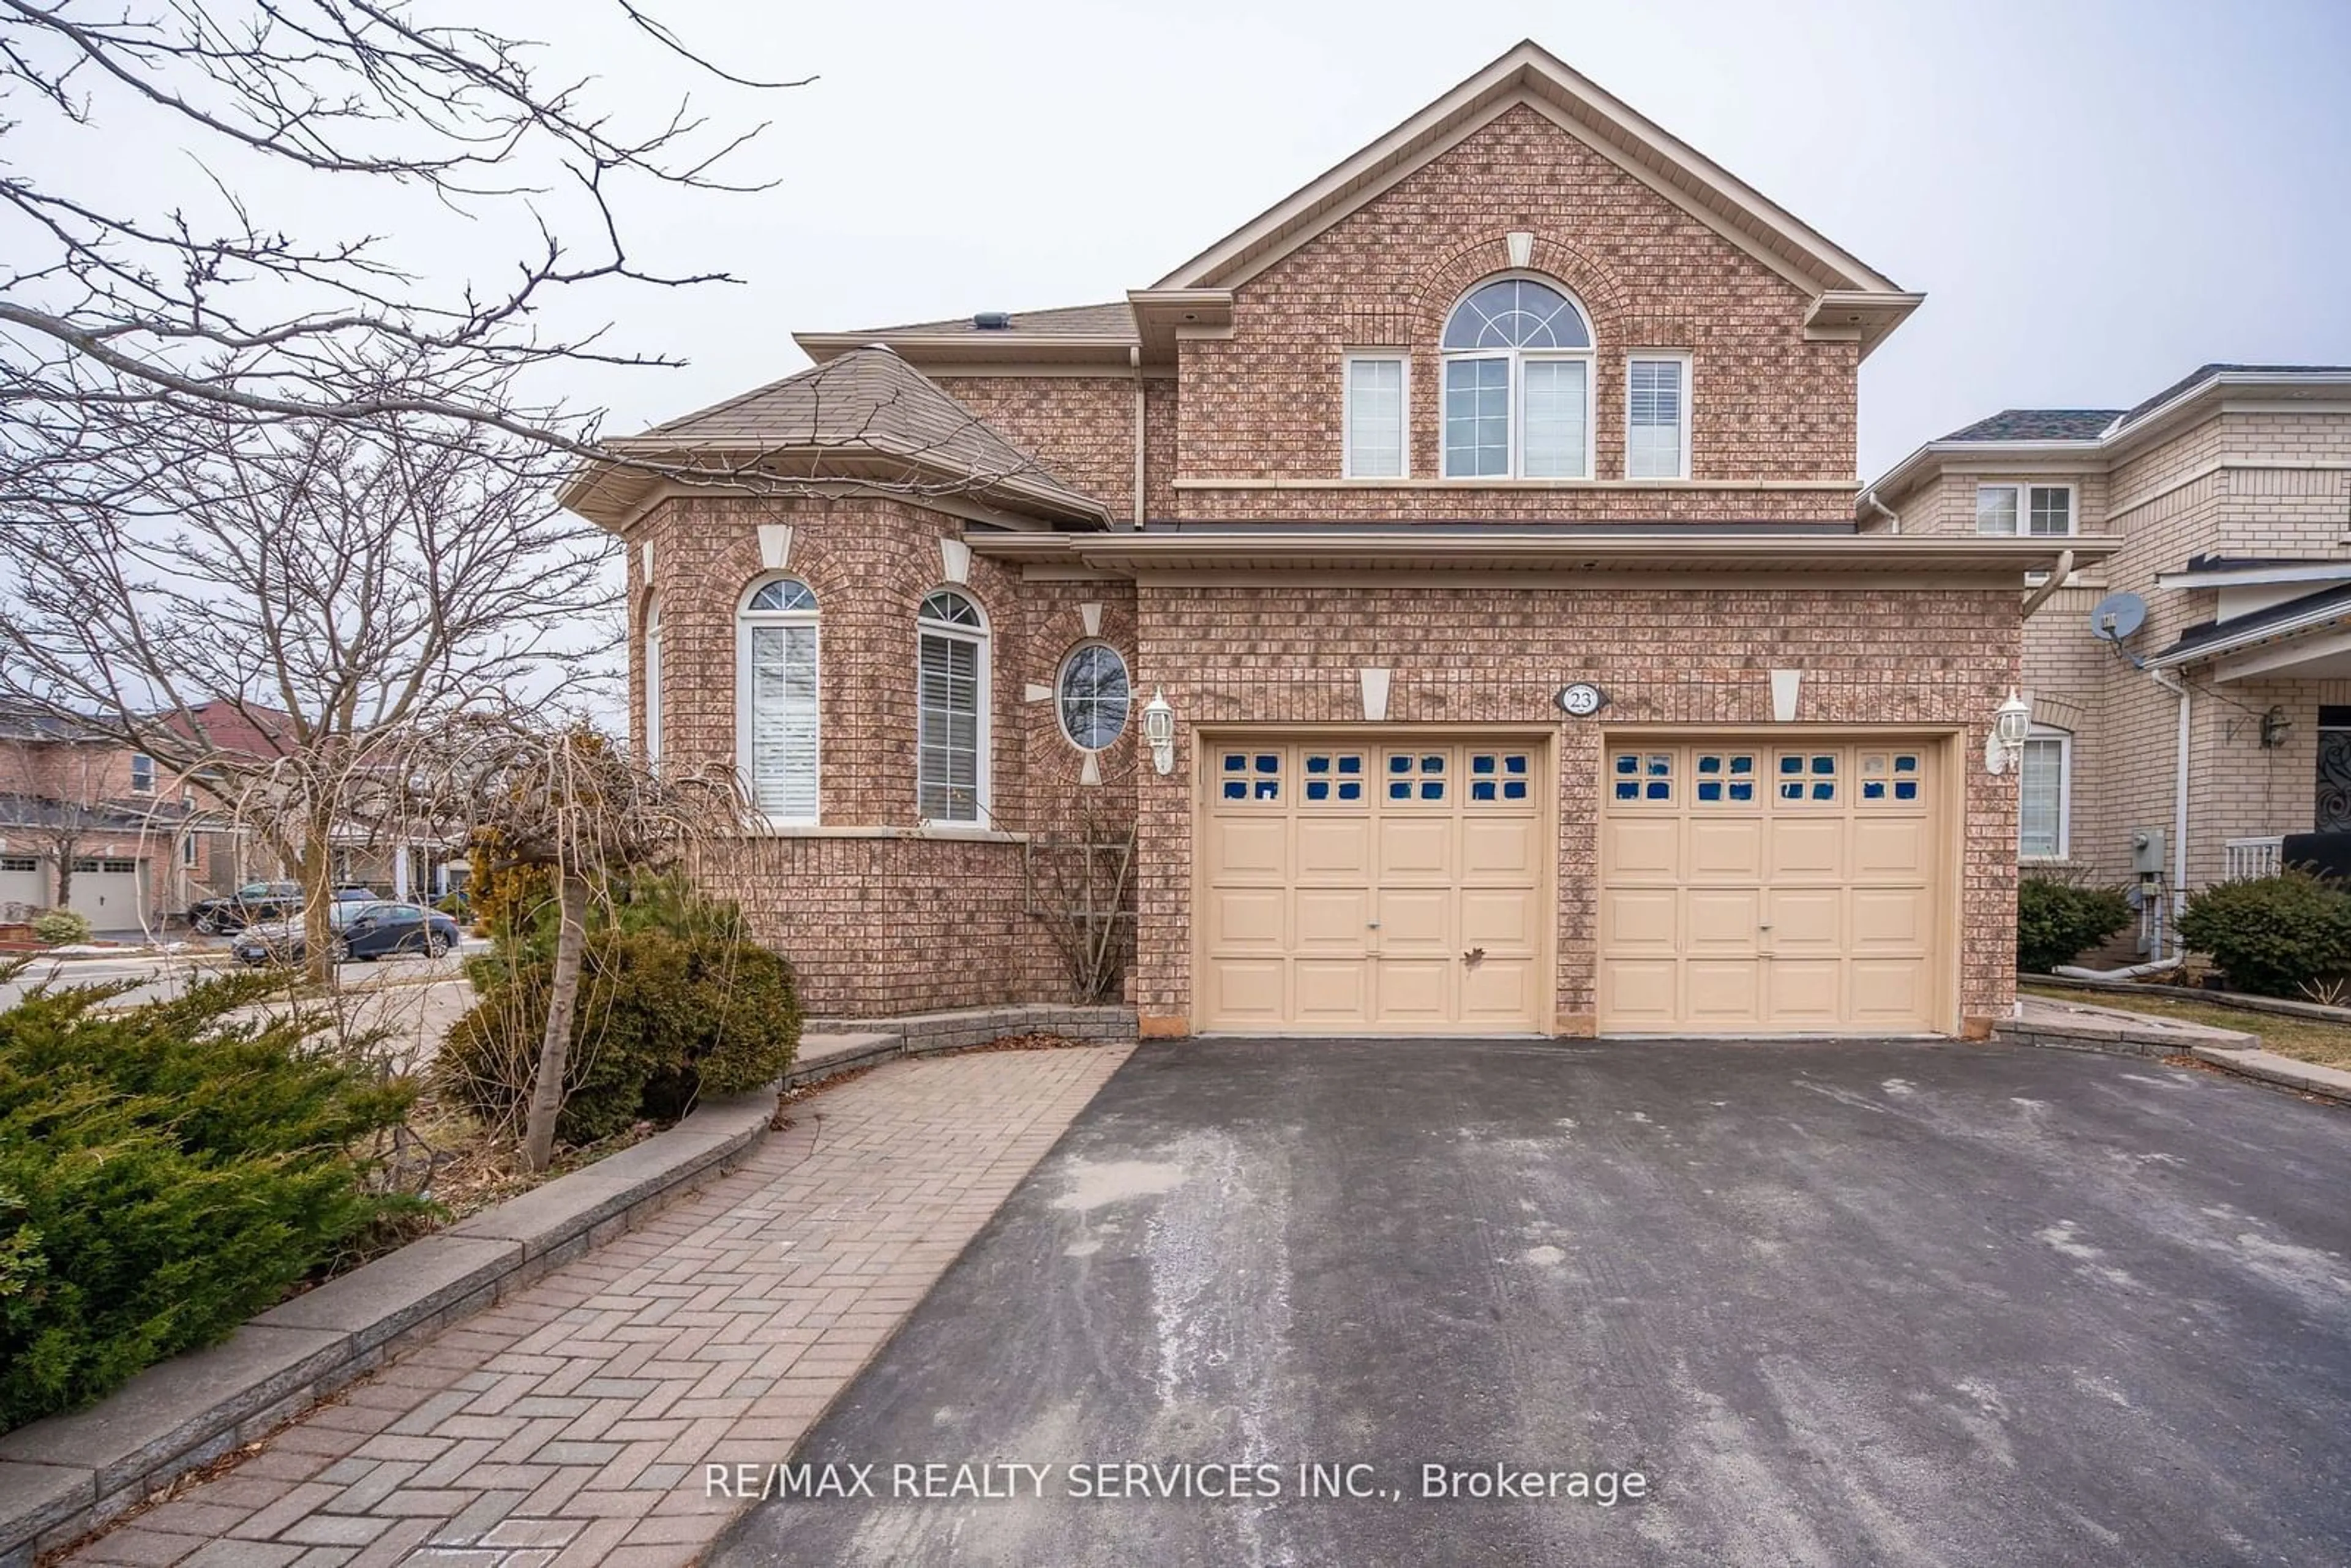 Home with brick exterior material for 23 Brentcliff Dr, Brampton Ontario L7A 2N2